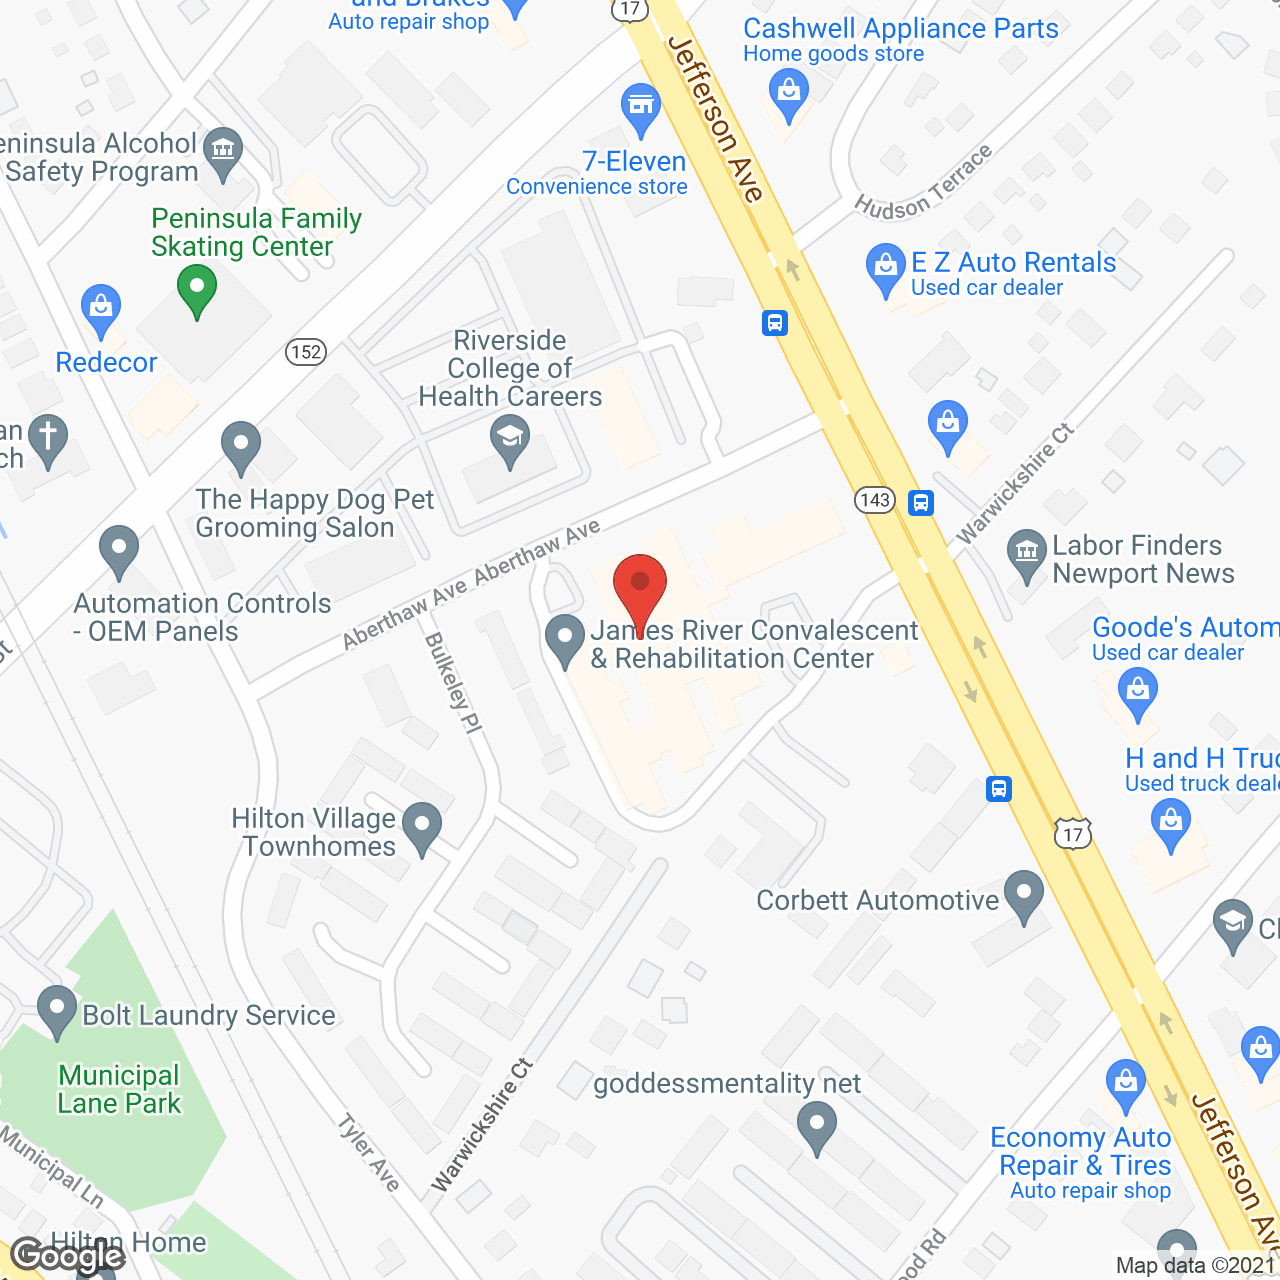 James River Convalescent Ctr in google map